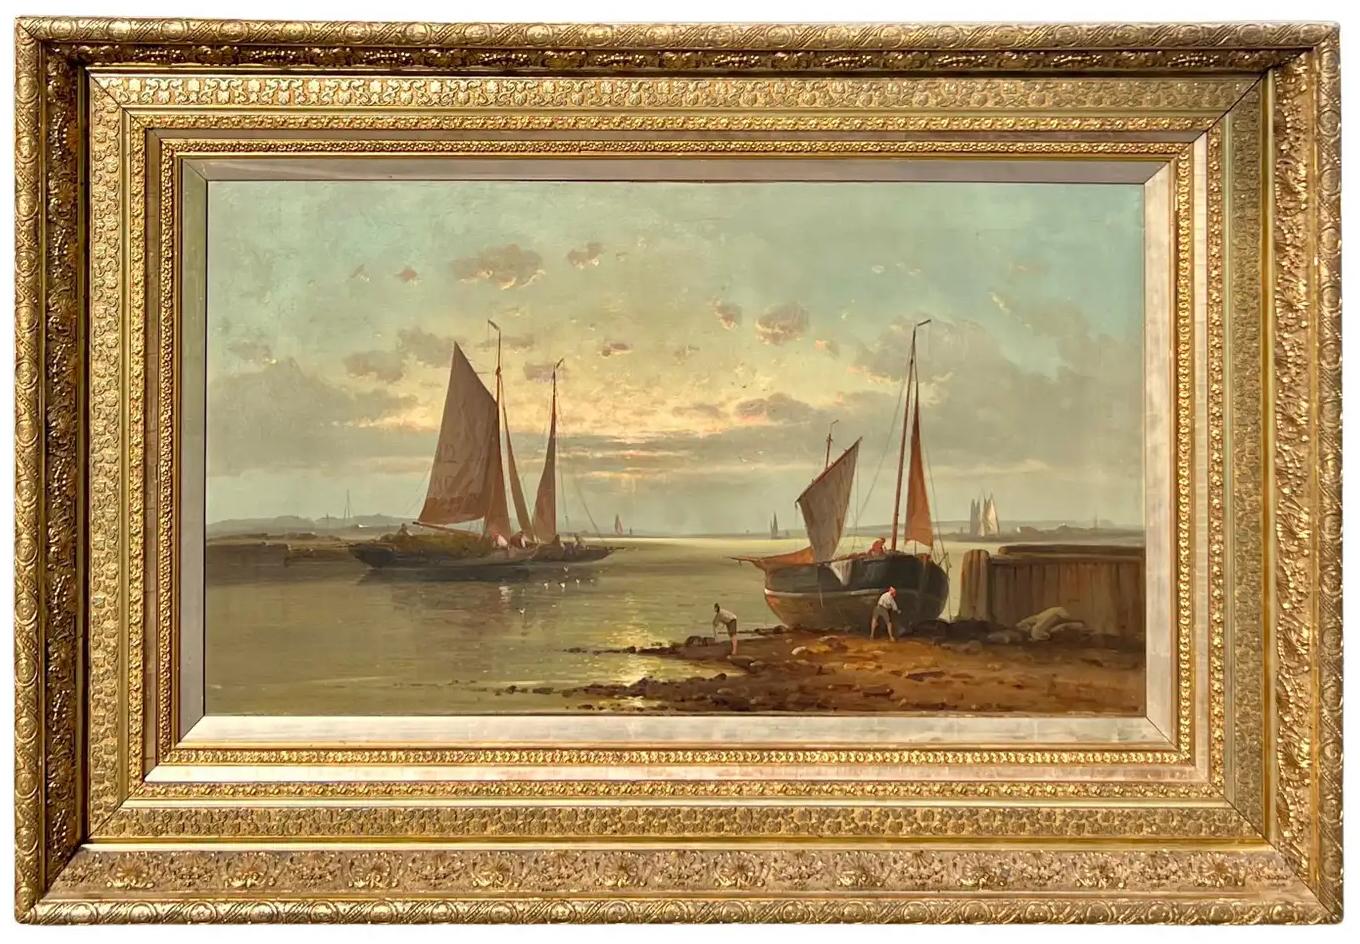 19th Century French School Landscape Painting - The Calm Harbor